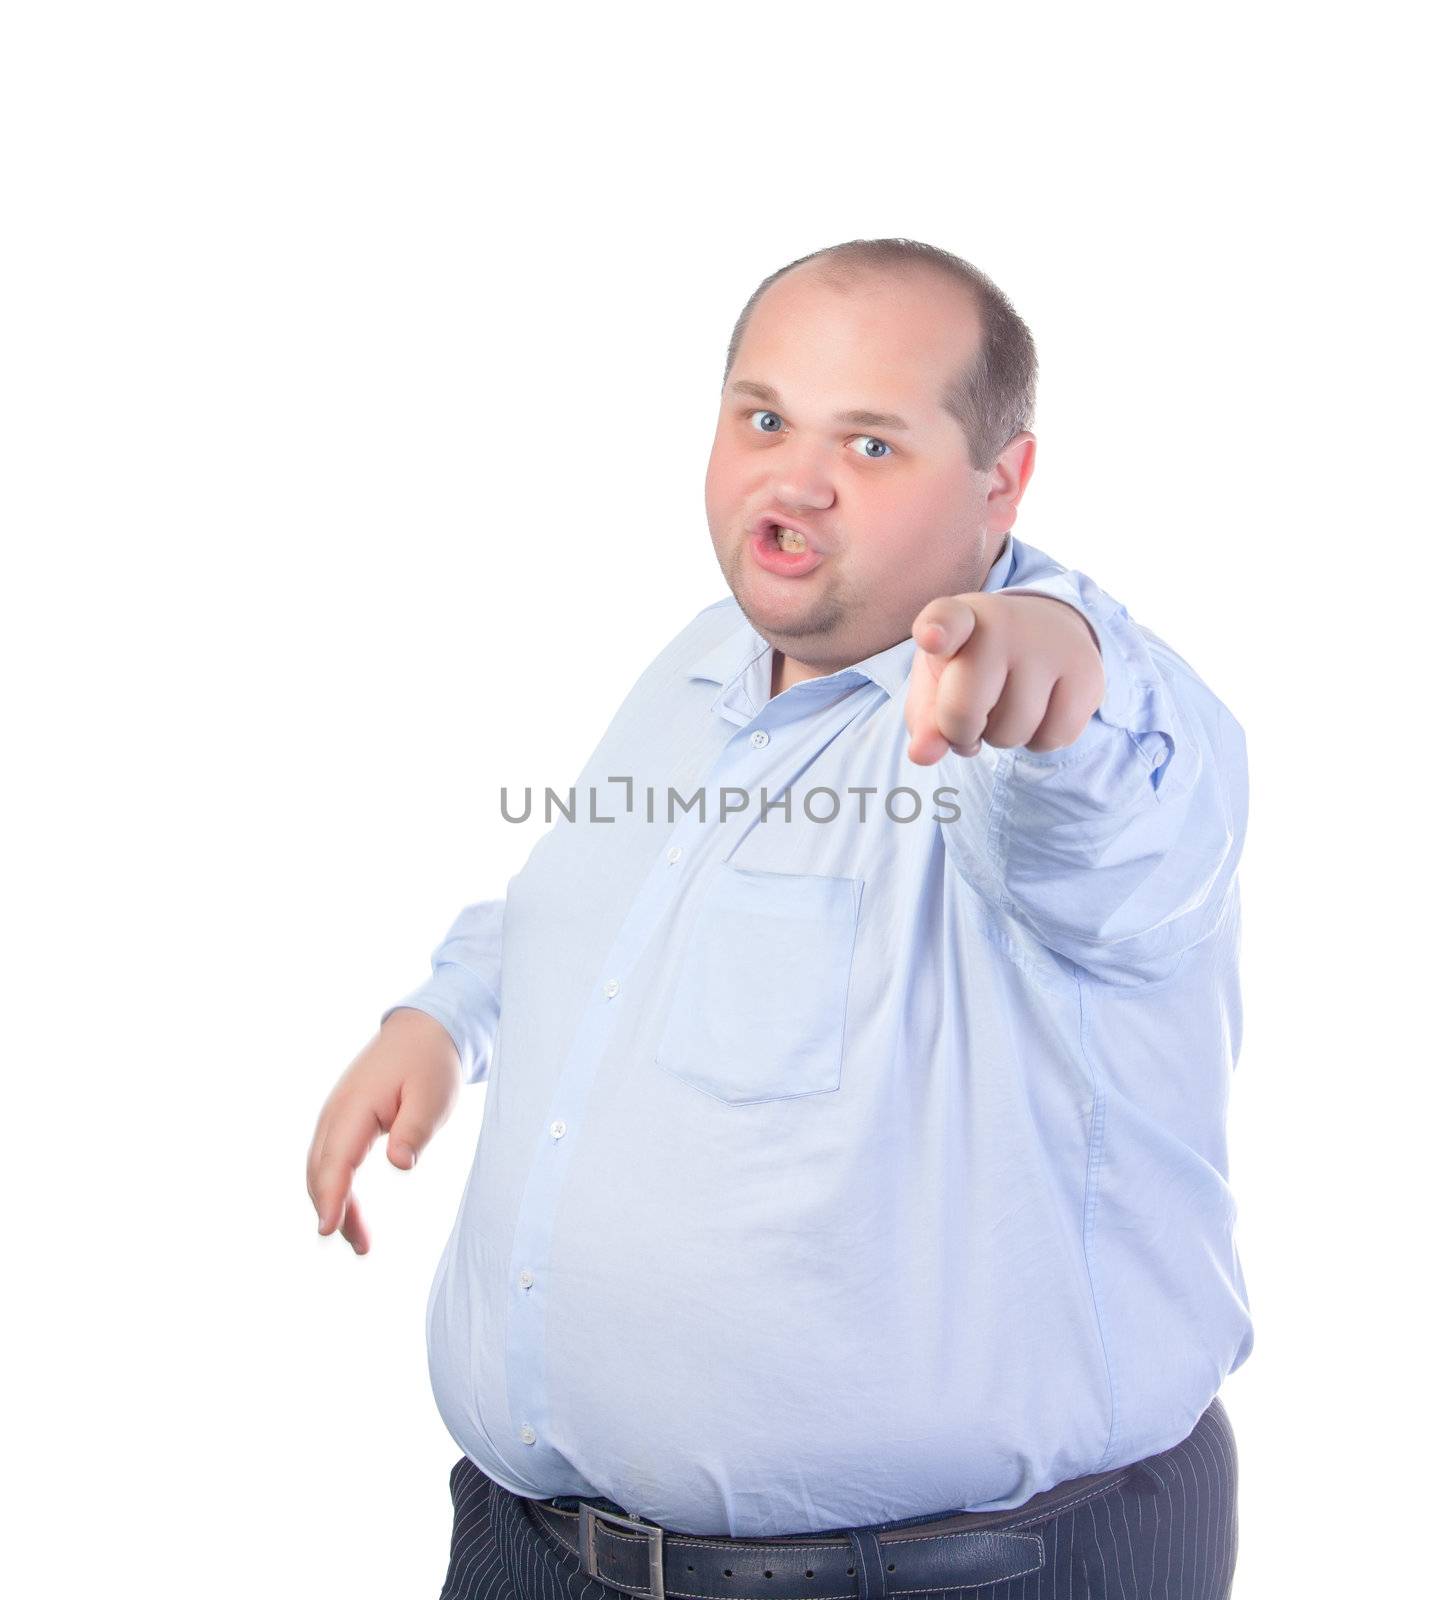 Fat Man in a Blue Shirt, Points Finger, isolated